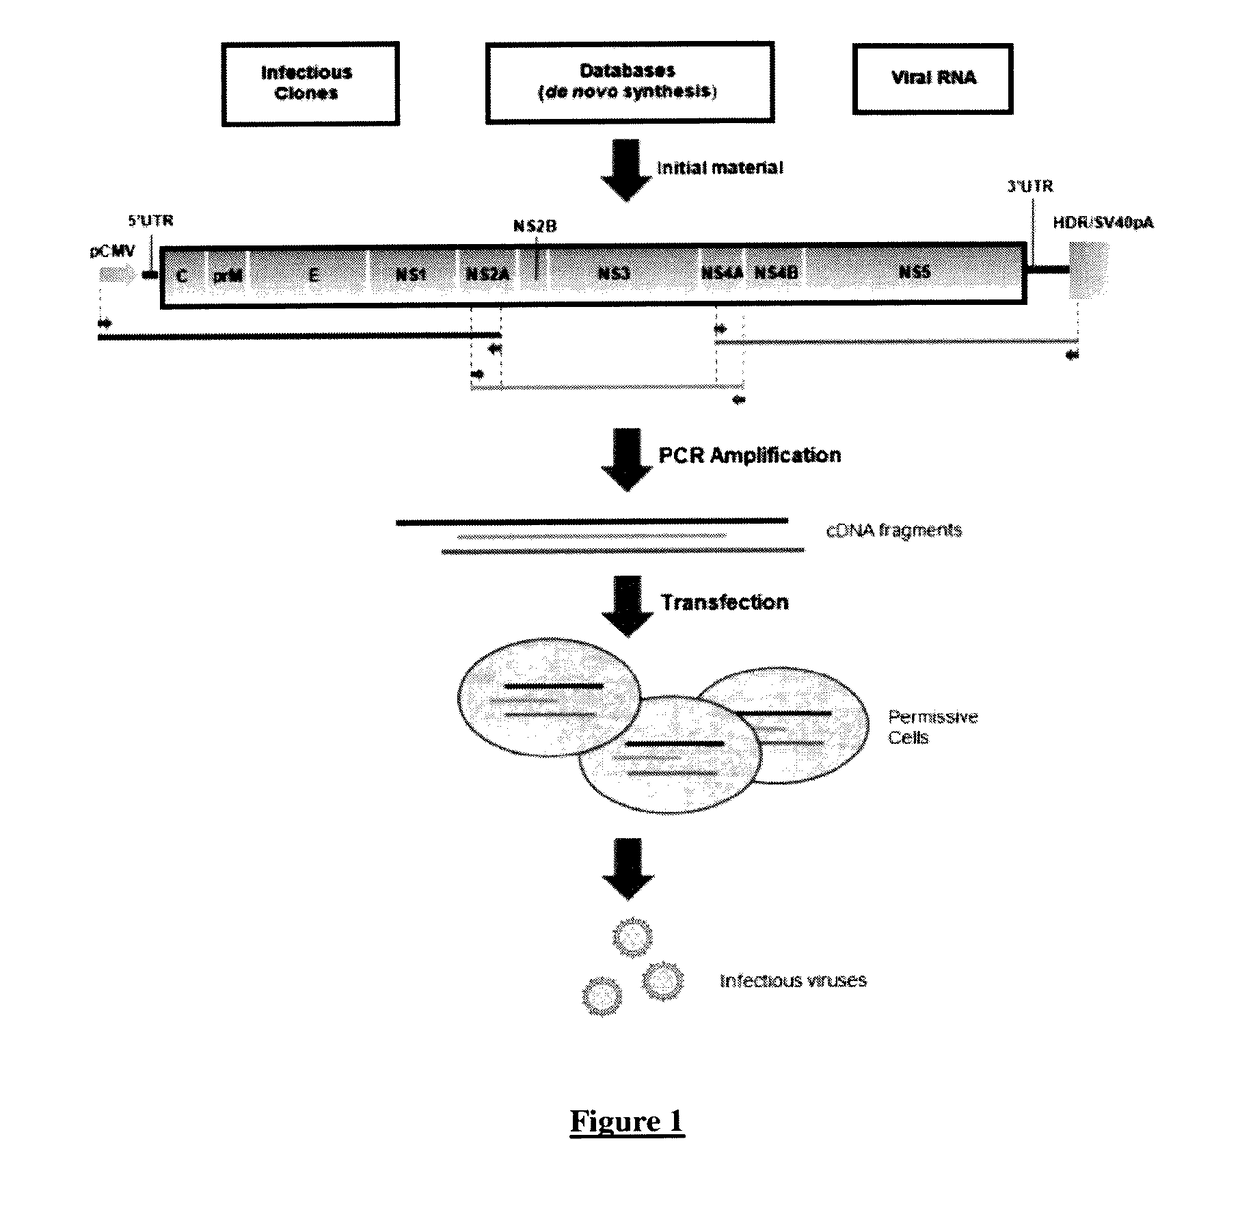 Method for rapid generation of an infectious RNA virus